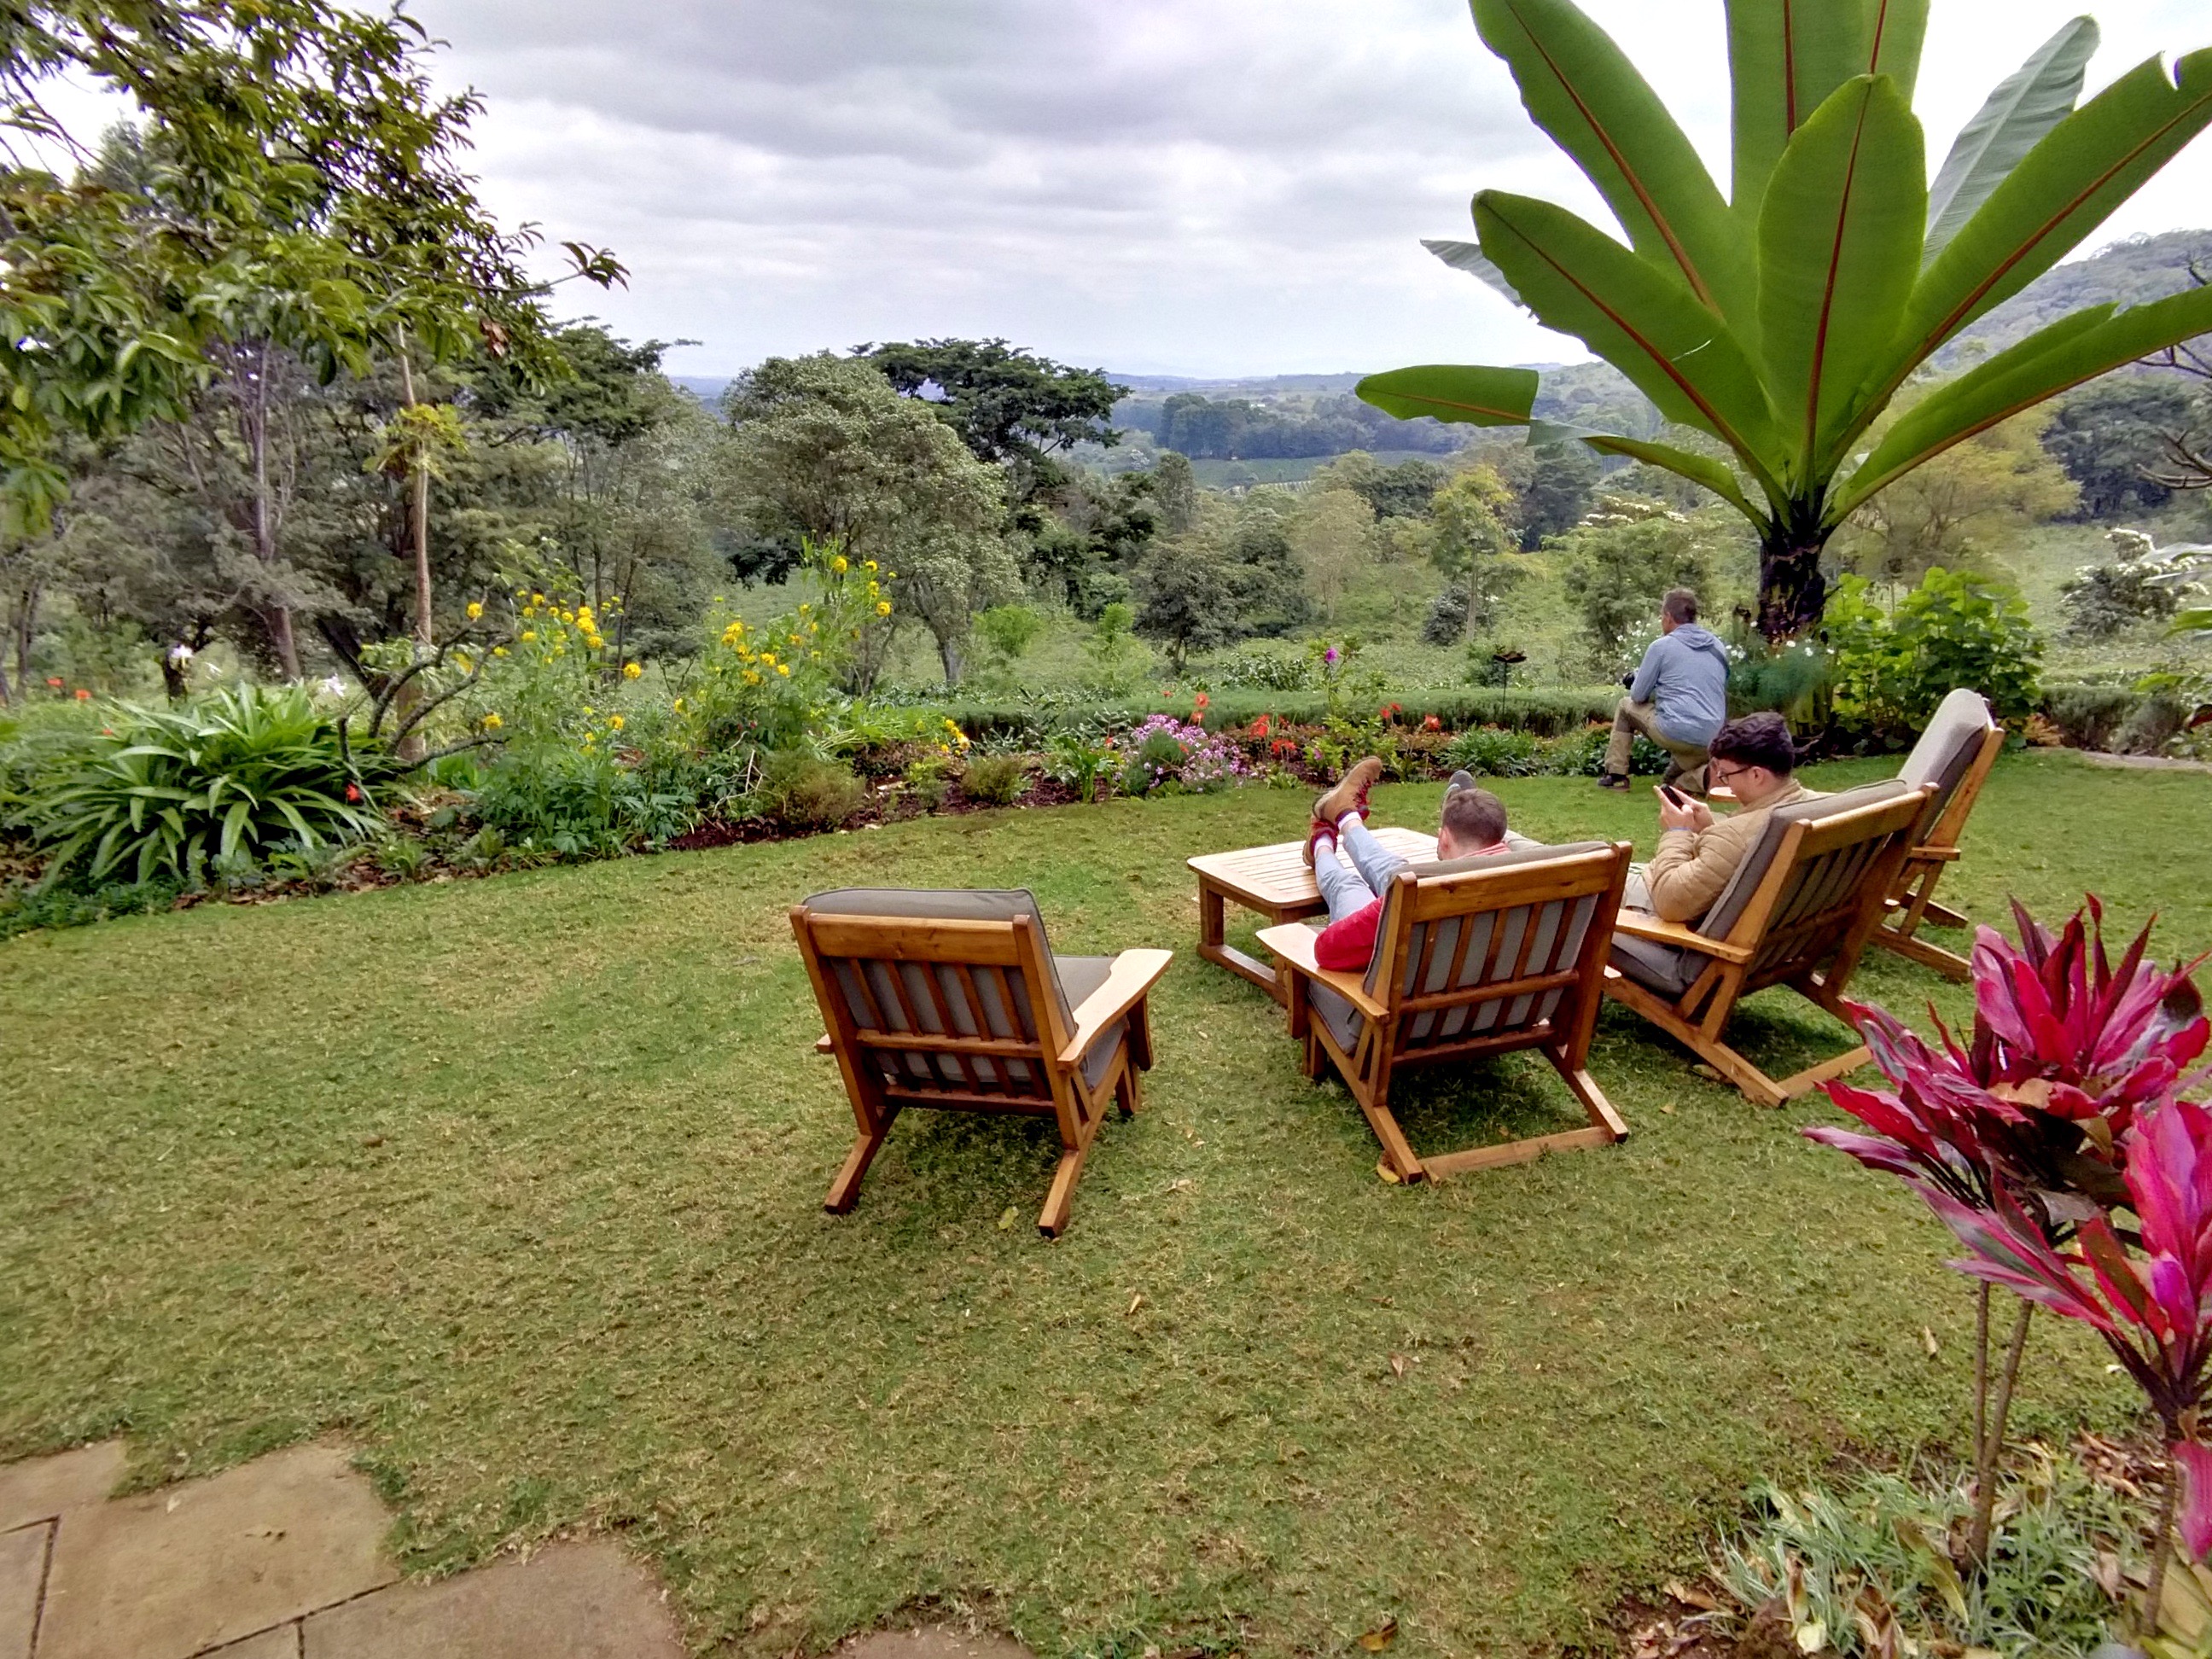 Three lawn chairs and two young men in a lush environment overlooking the hills